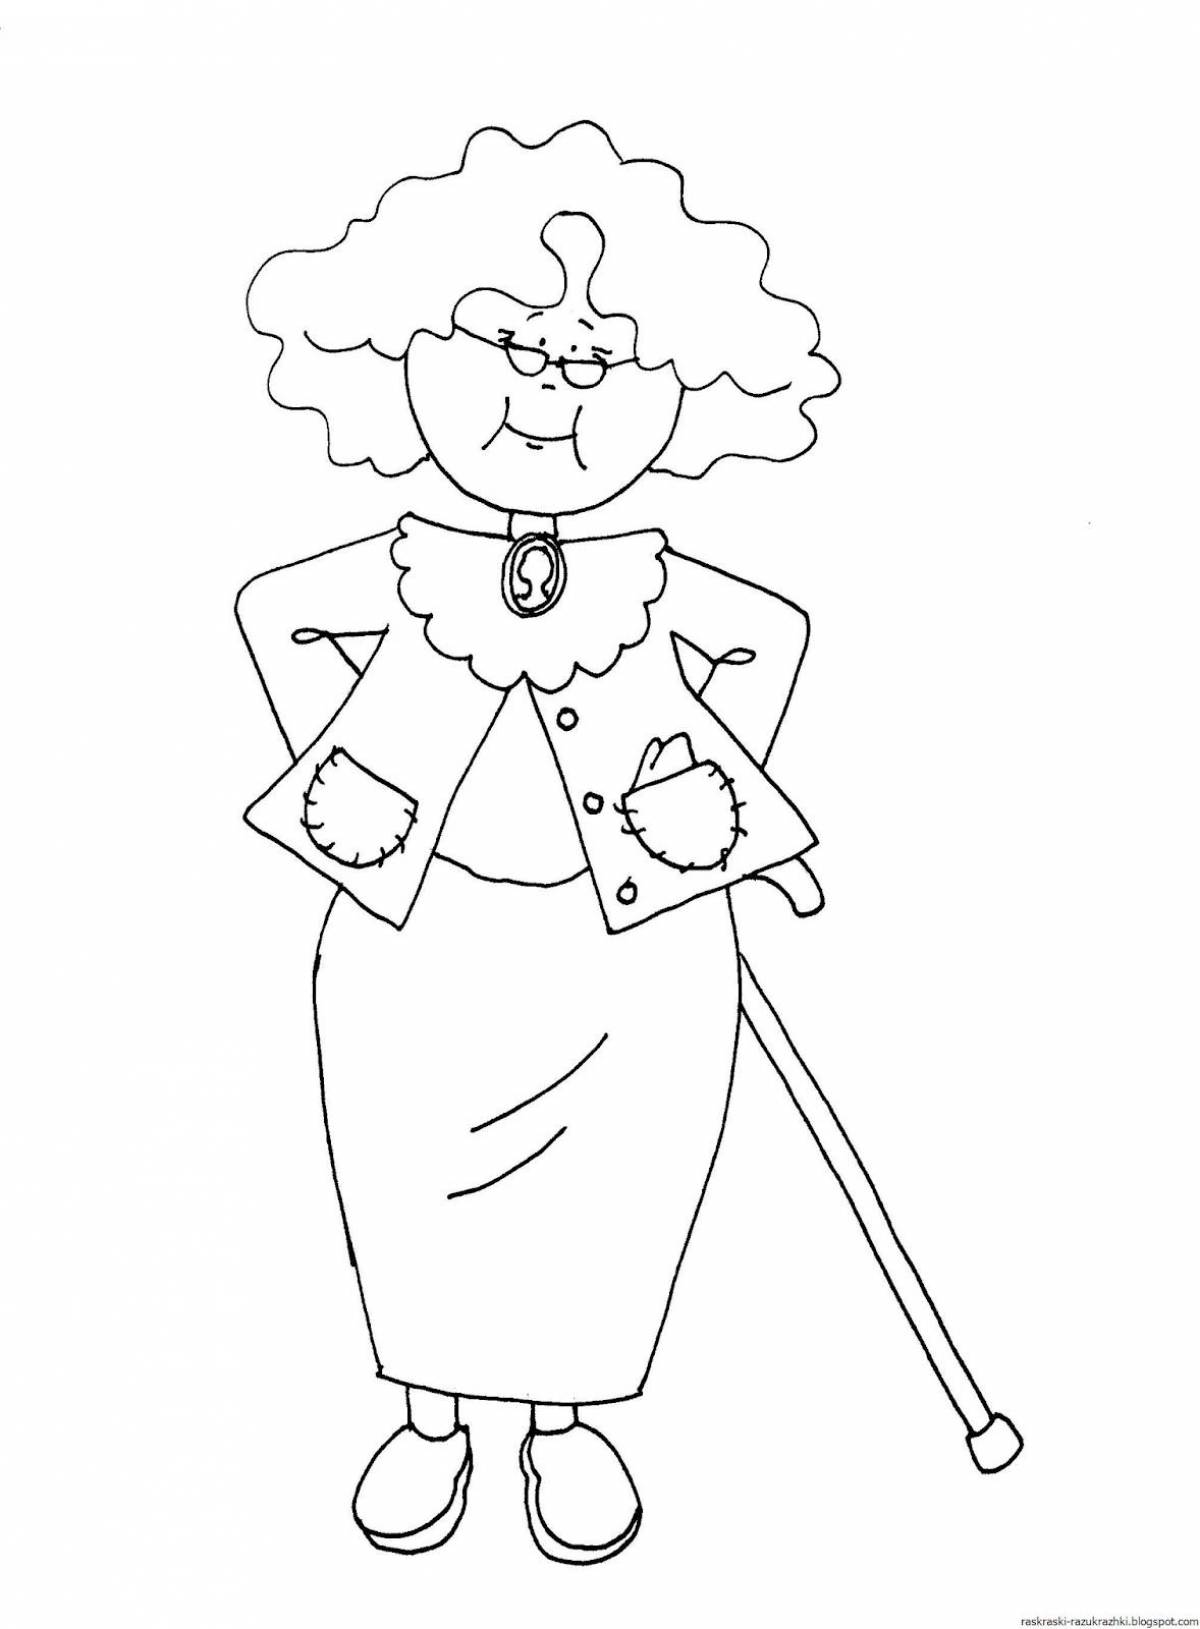 Colorful grandmother coloring page